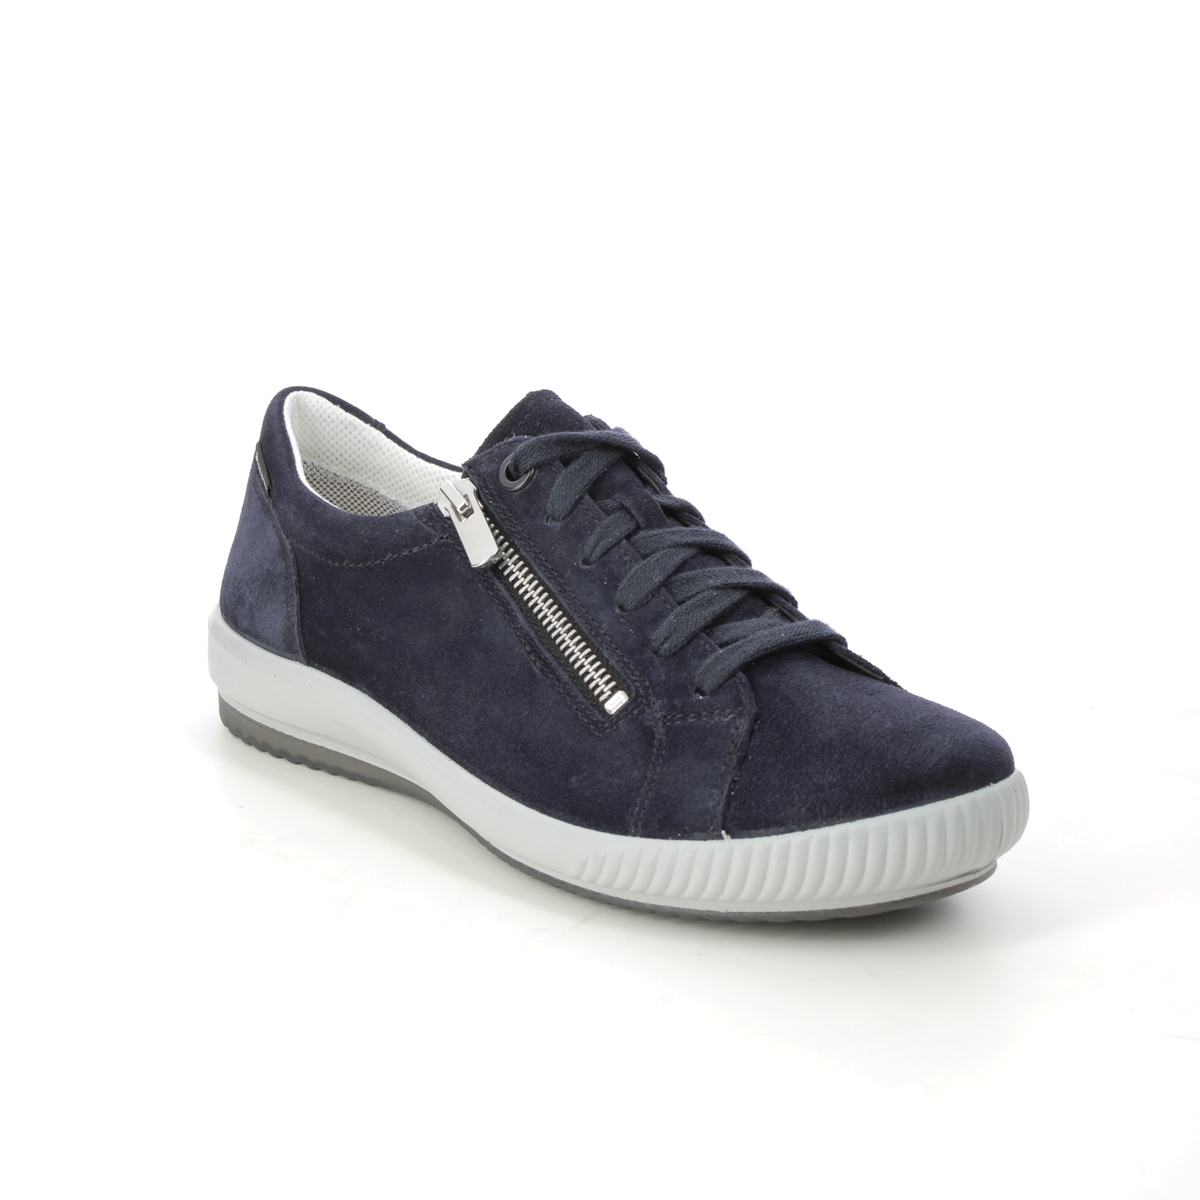 Legero Tanaro 5 Gtx Navy Suede Womens Lacing Shoes 2000219-8000 In Size 6 In Plain Navy Suede